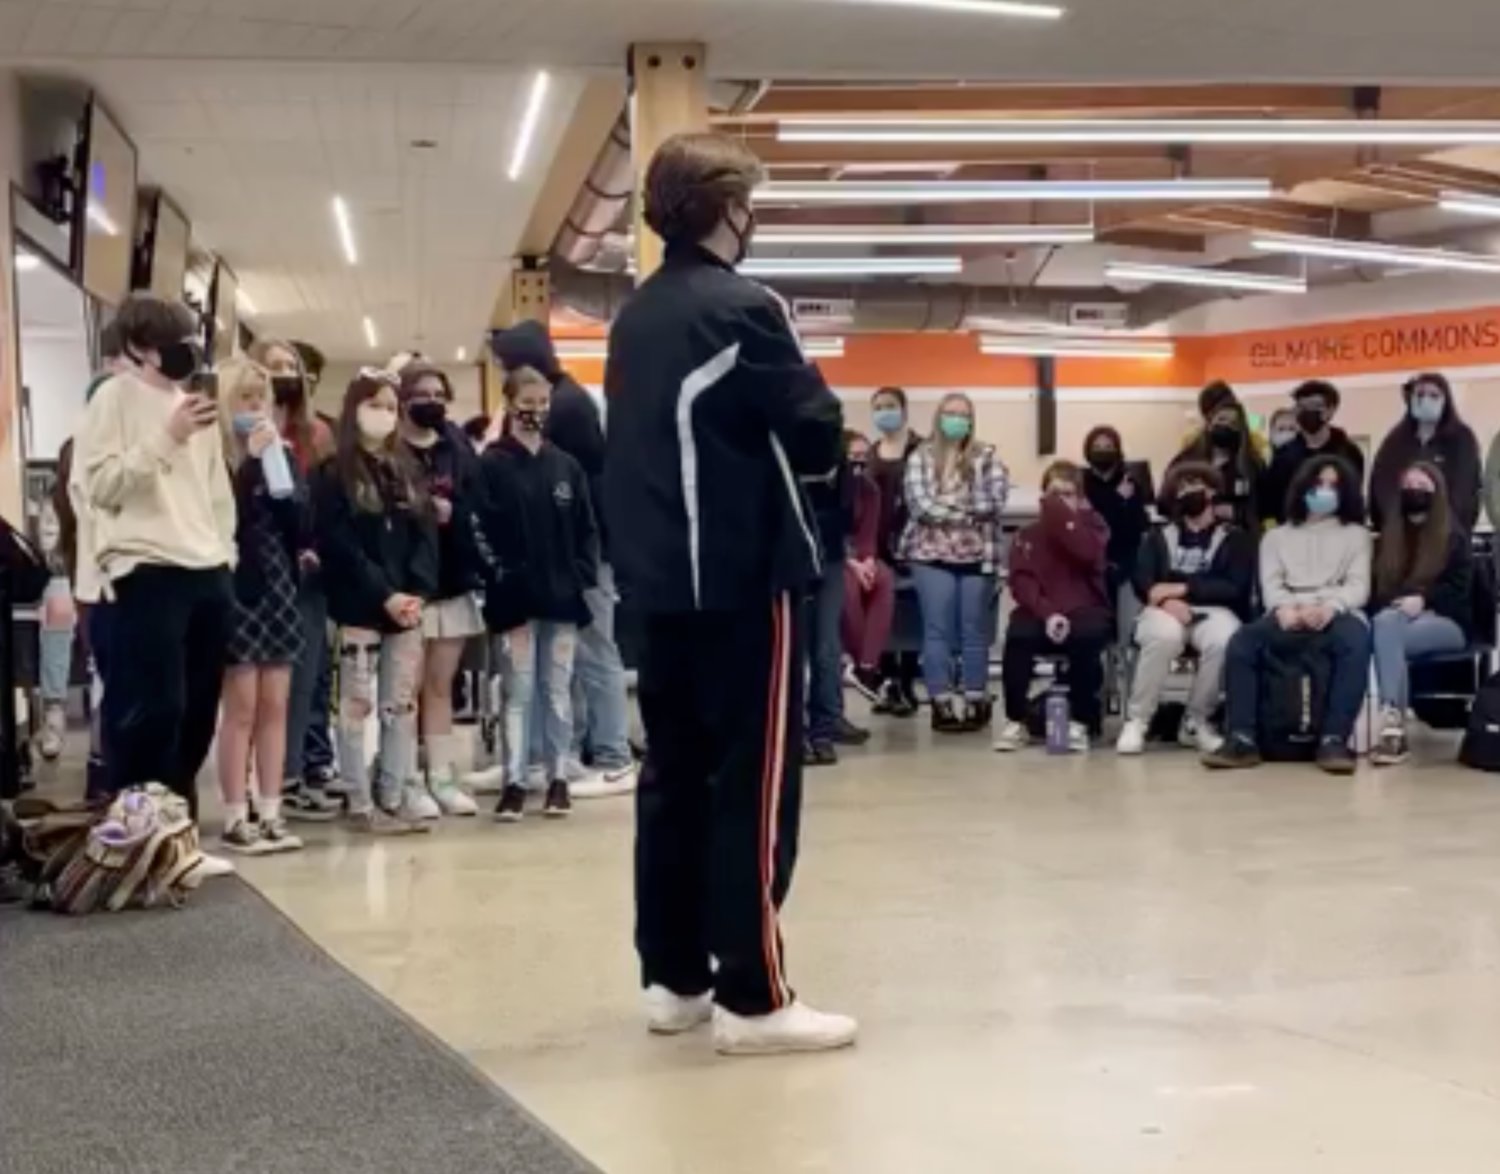 Students stand and sit in the Centralia High School commons during a protest on Wednesday in this image from a video of the event provided to The Chronicle.